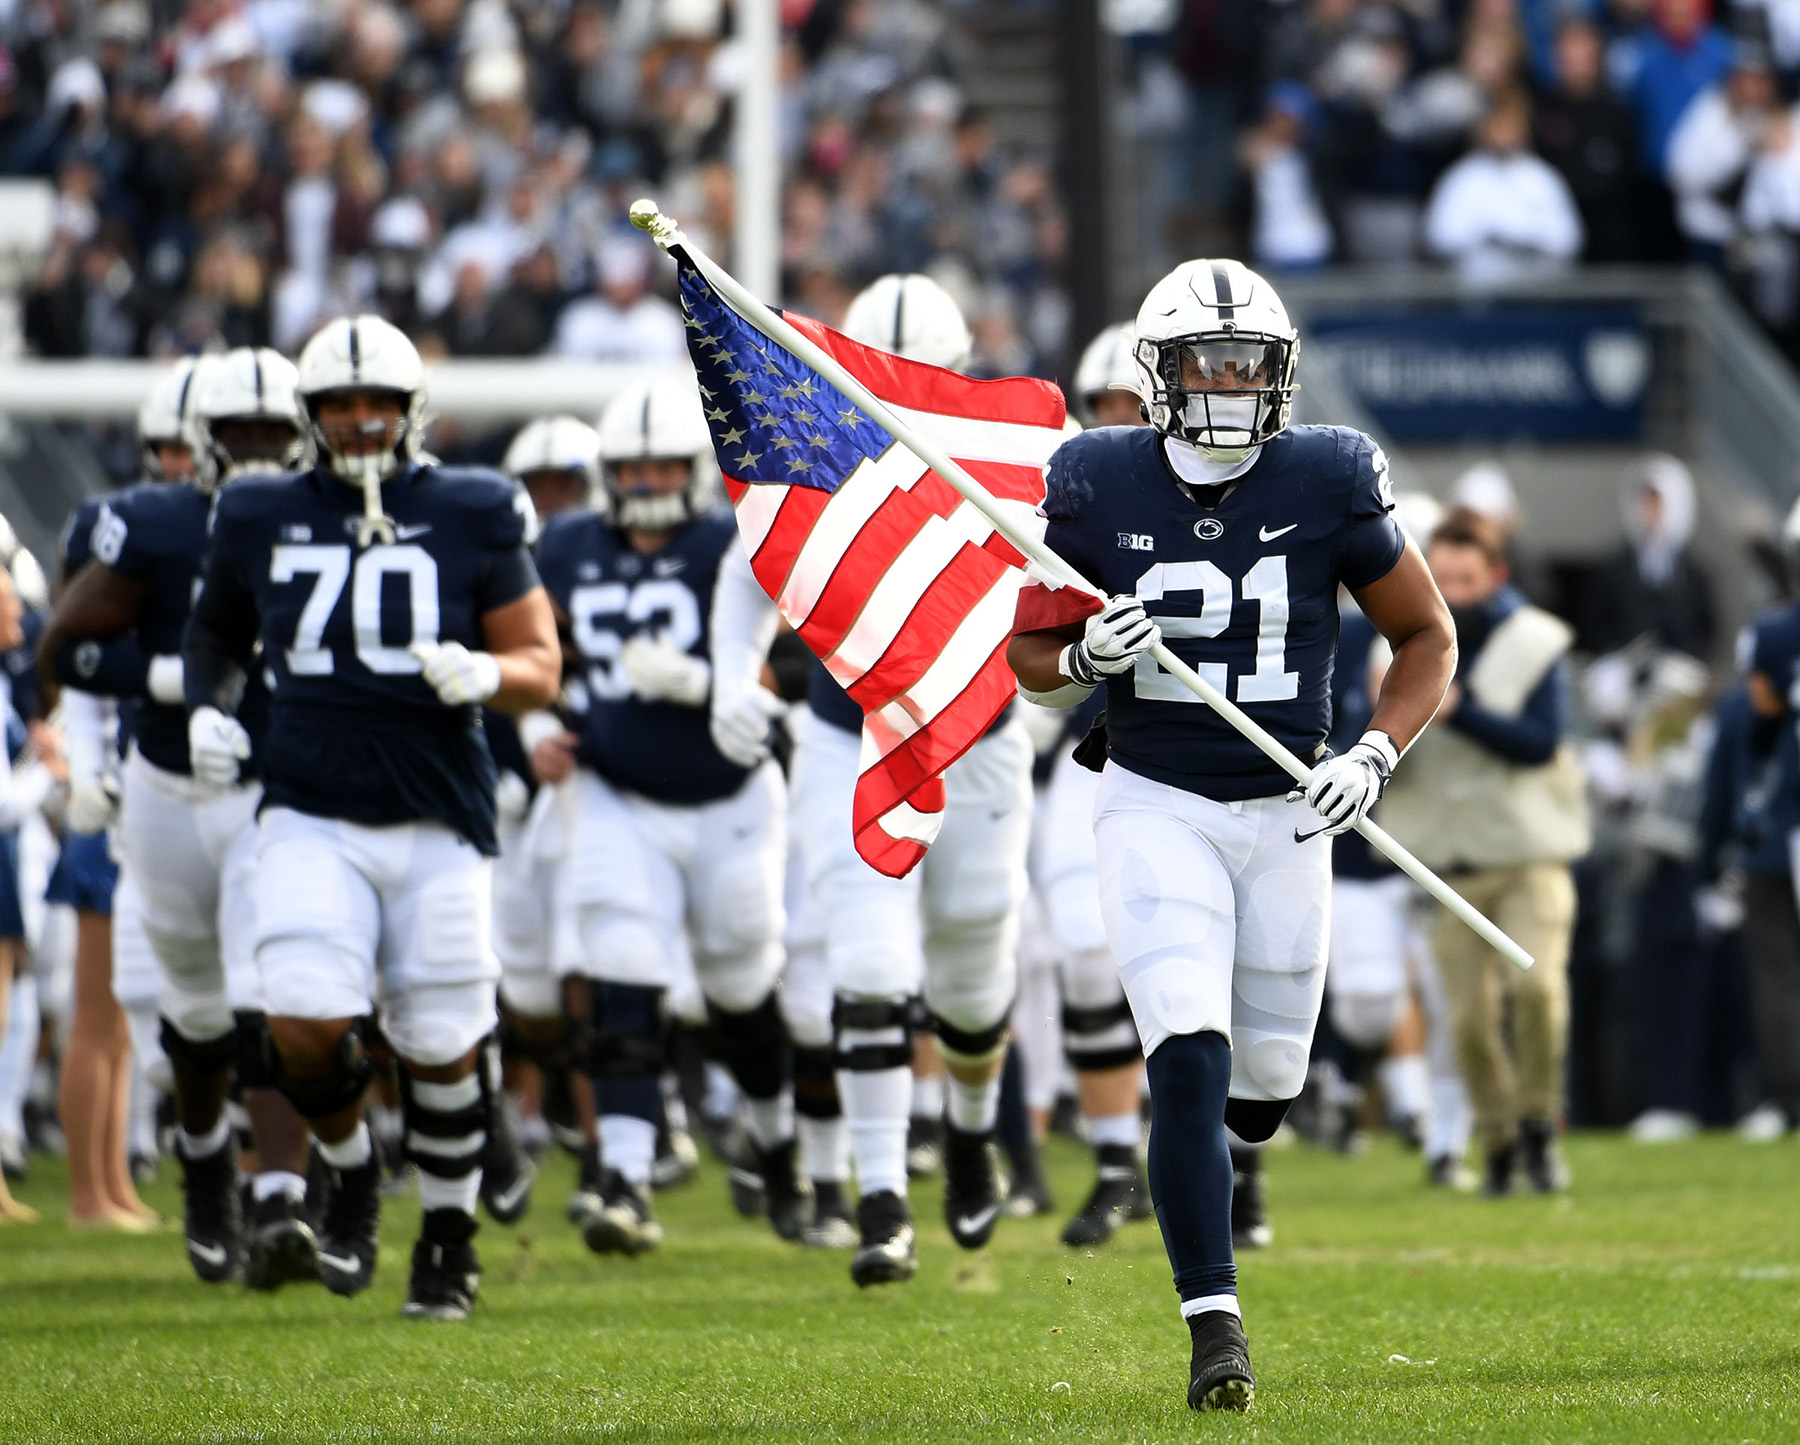 Penn State player with American flag